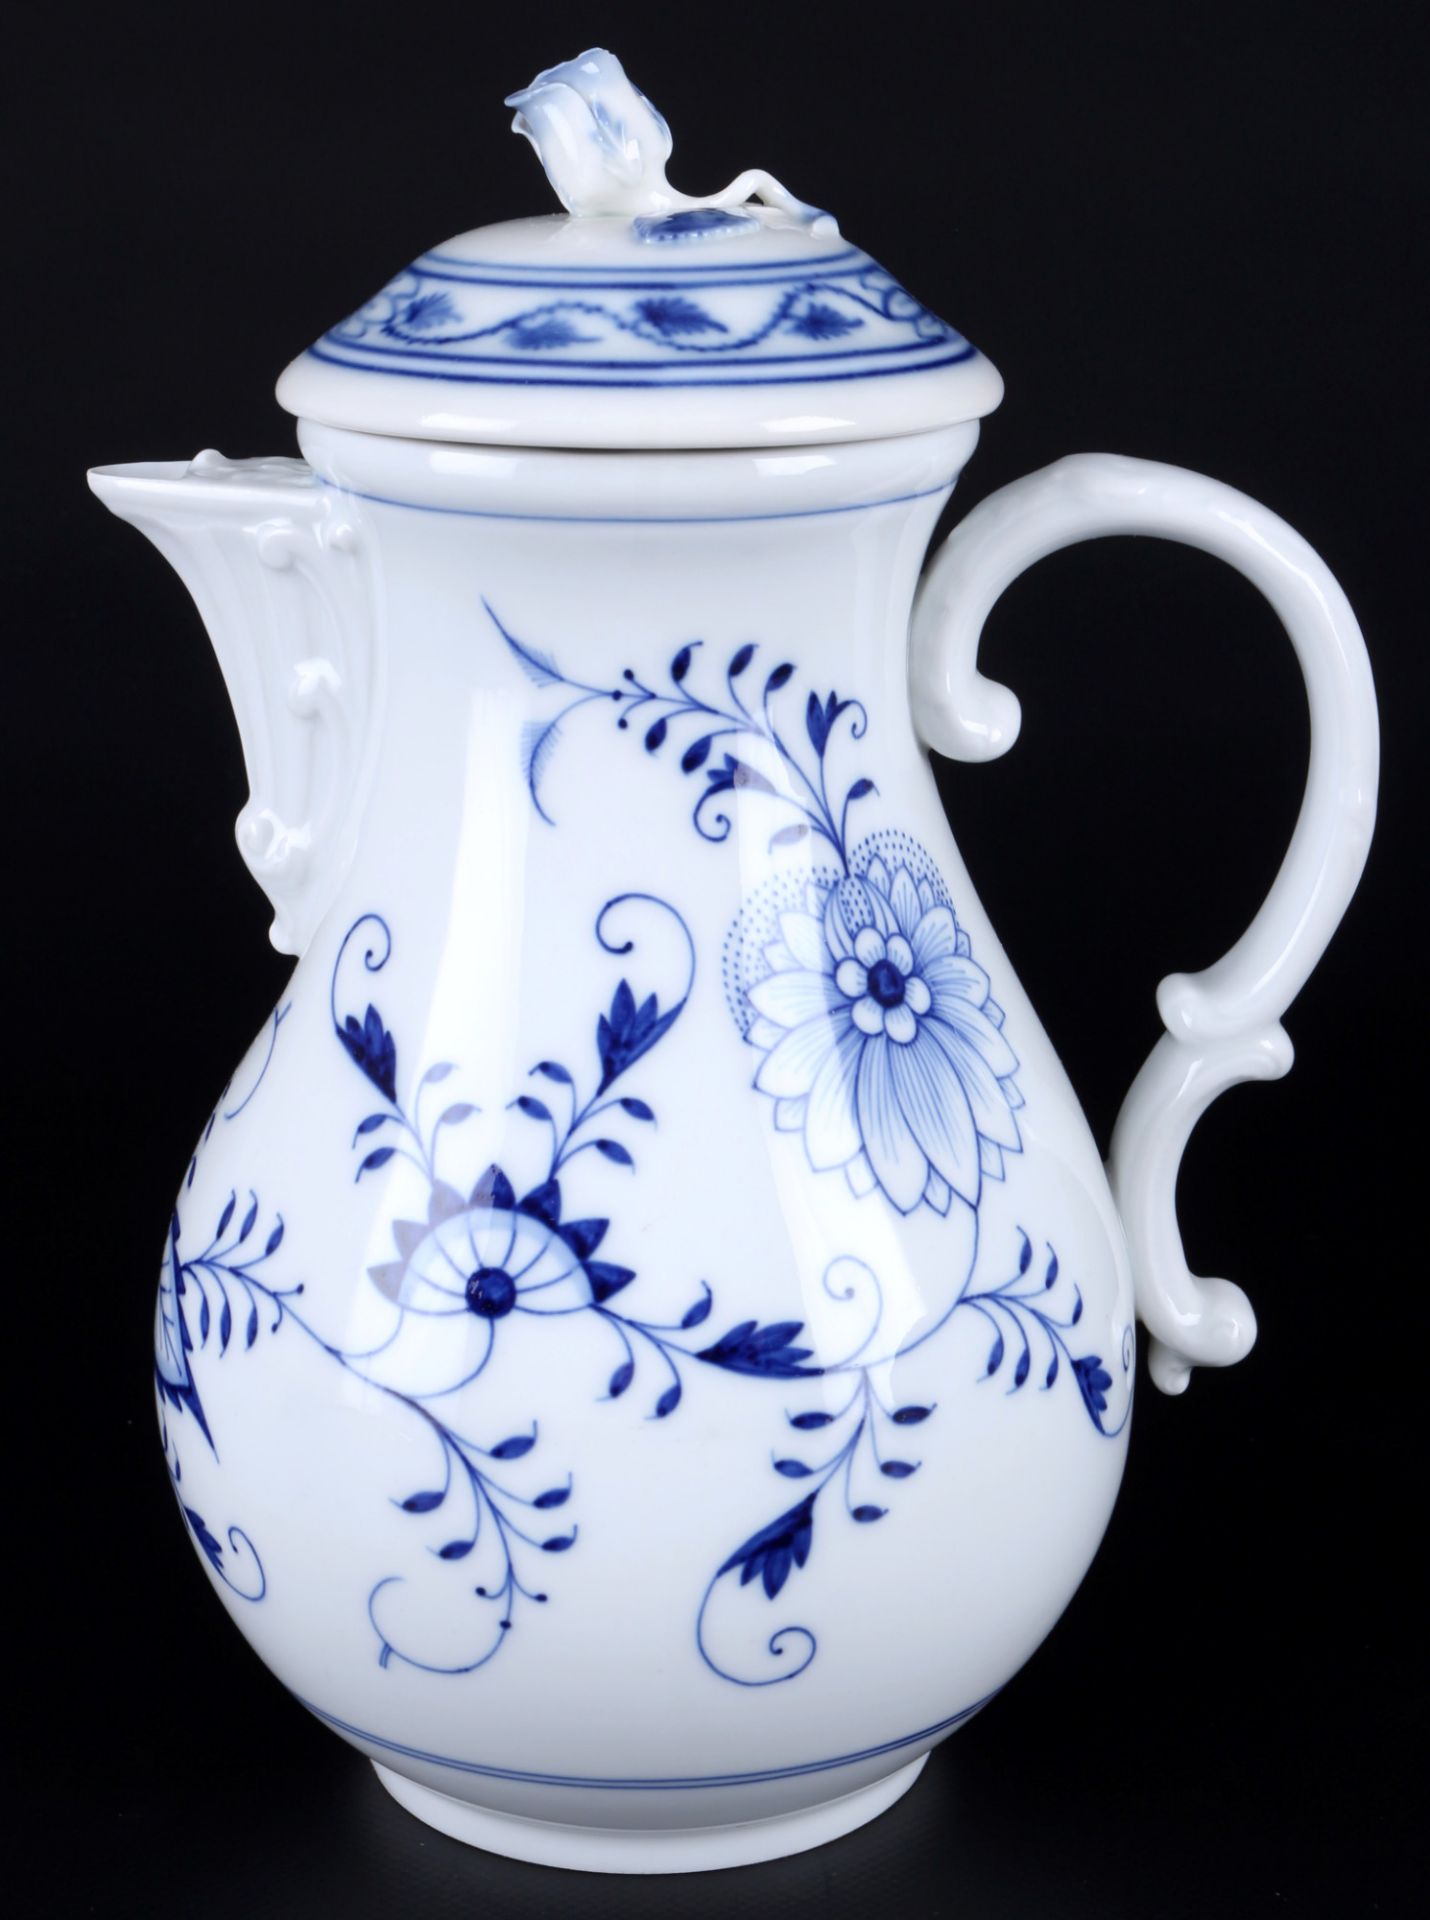 Meissen Onion Pattern coffee service for 6 persons 1st choice, Kaffeeservice für 6 Personen 1.Wahl, - Image 3 of 9